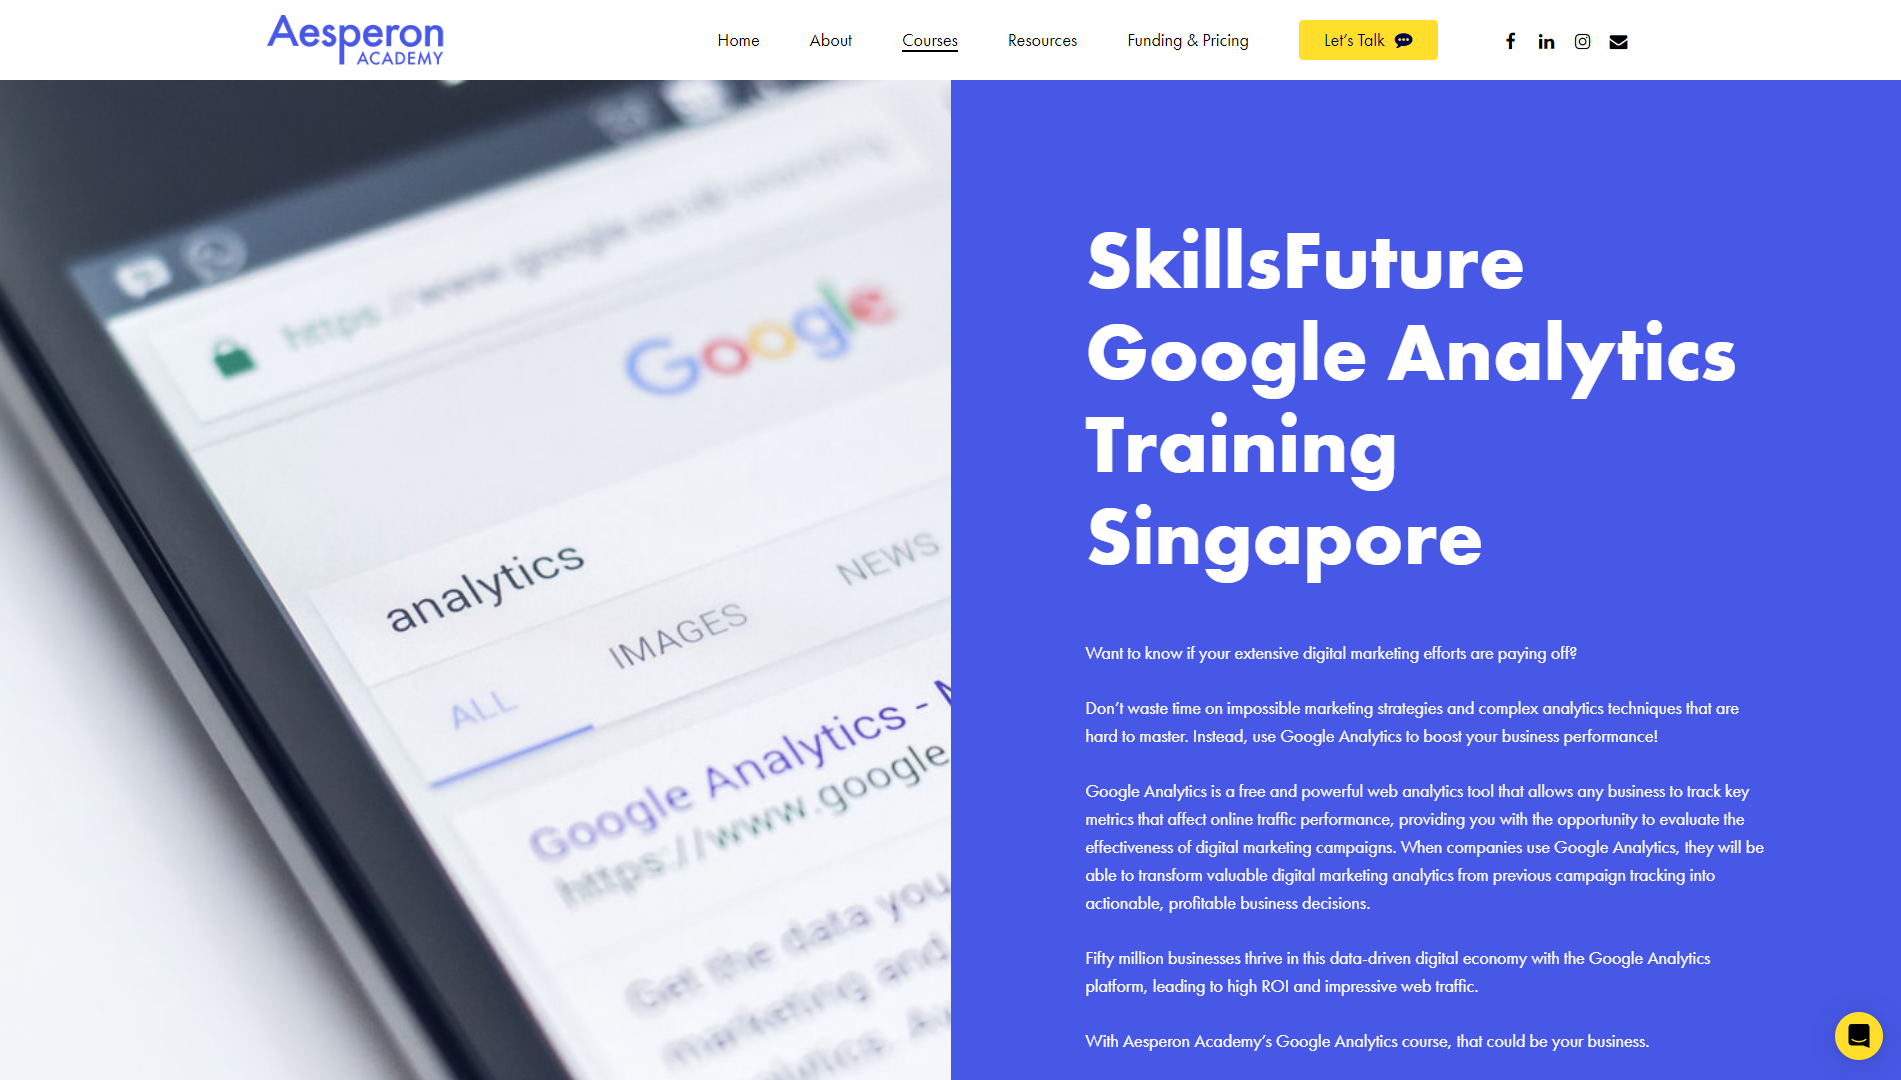 register for aesperon academy google analytics certification course in singapore